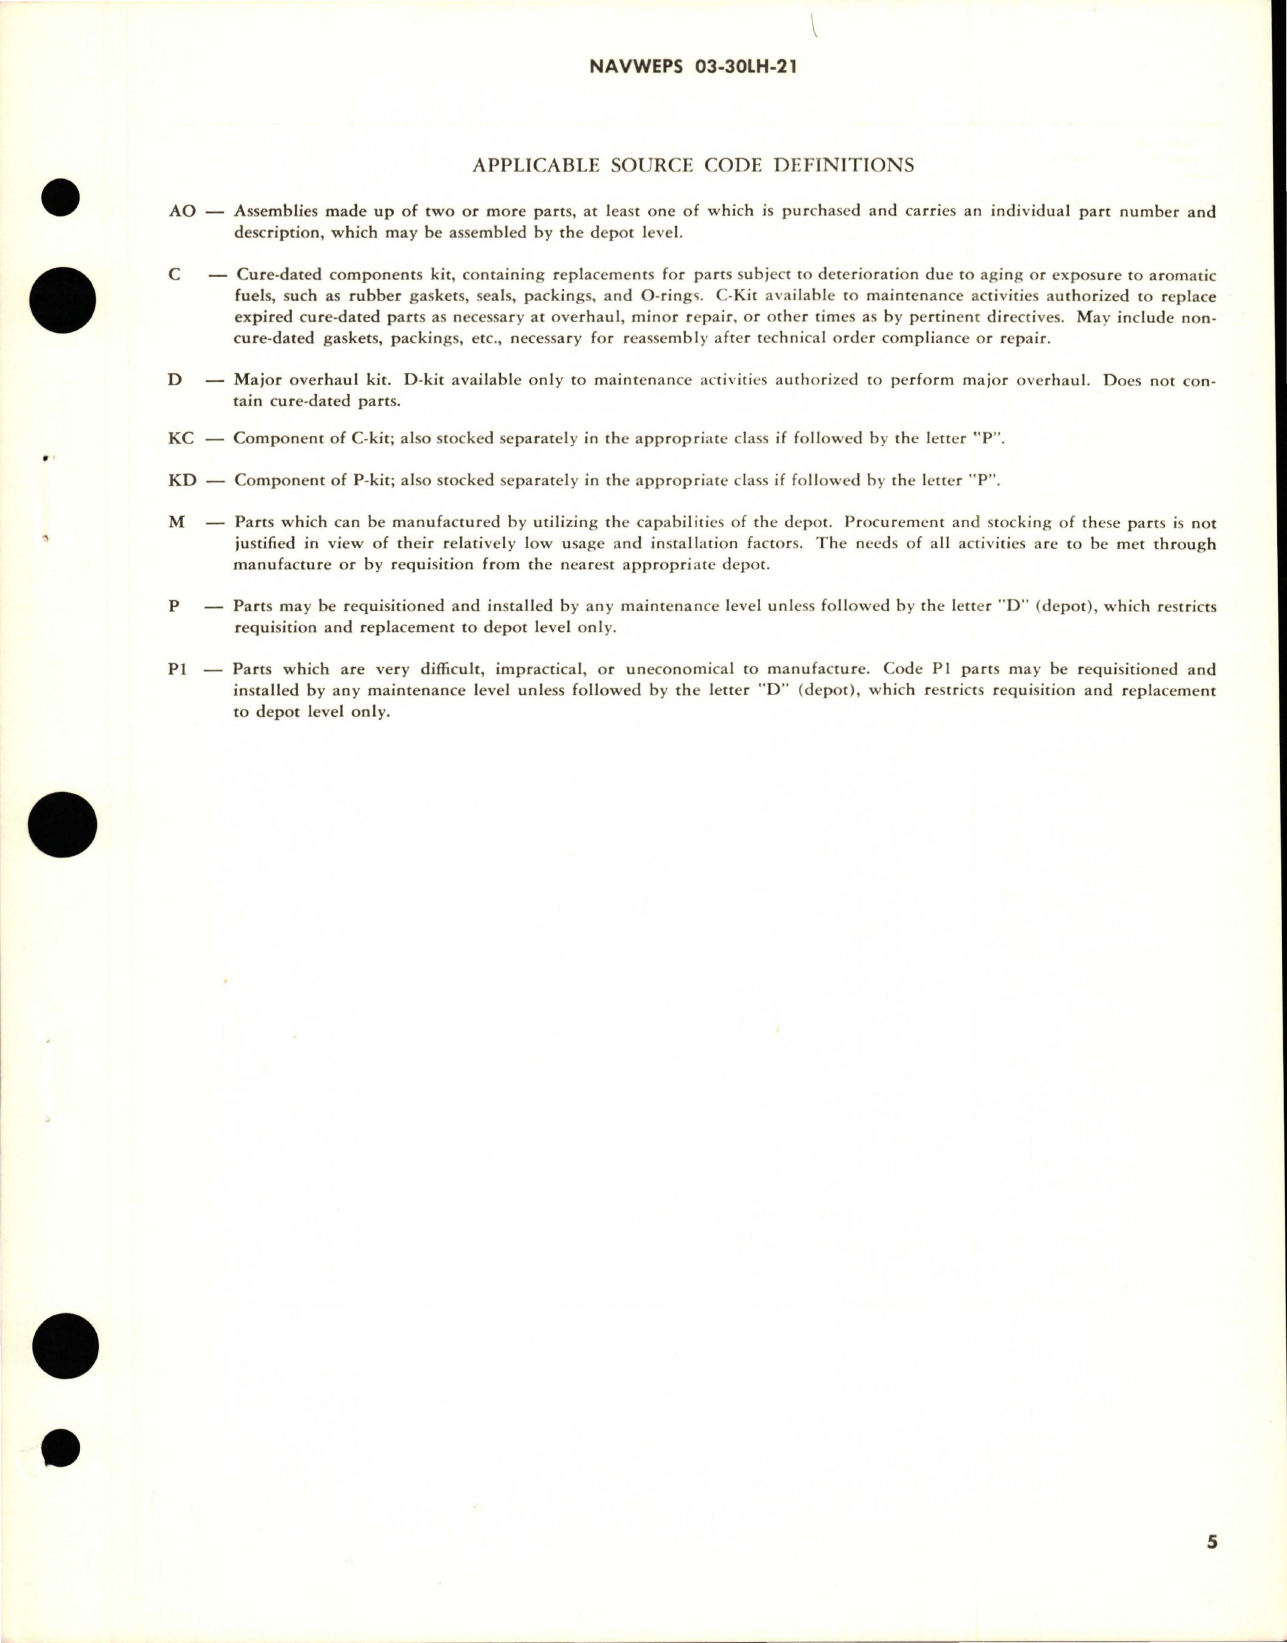 Sample page 5 from AirCorps Library document: Overhaul Instructions with Parts Breakdown for Rudder Booster Actuating Cylinder Assembly - Parts 668254-3 and 663278-1